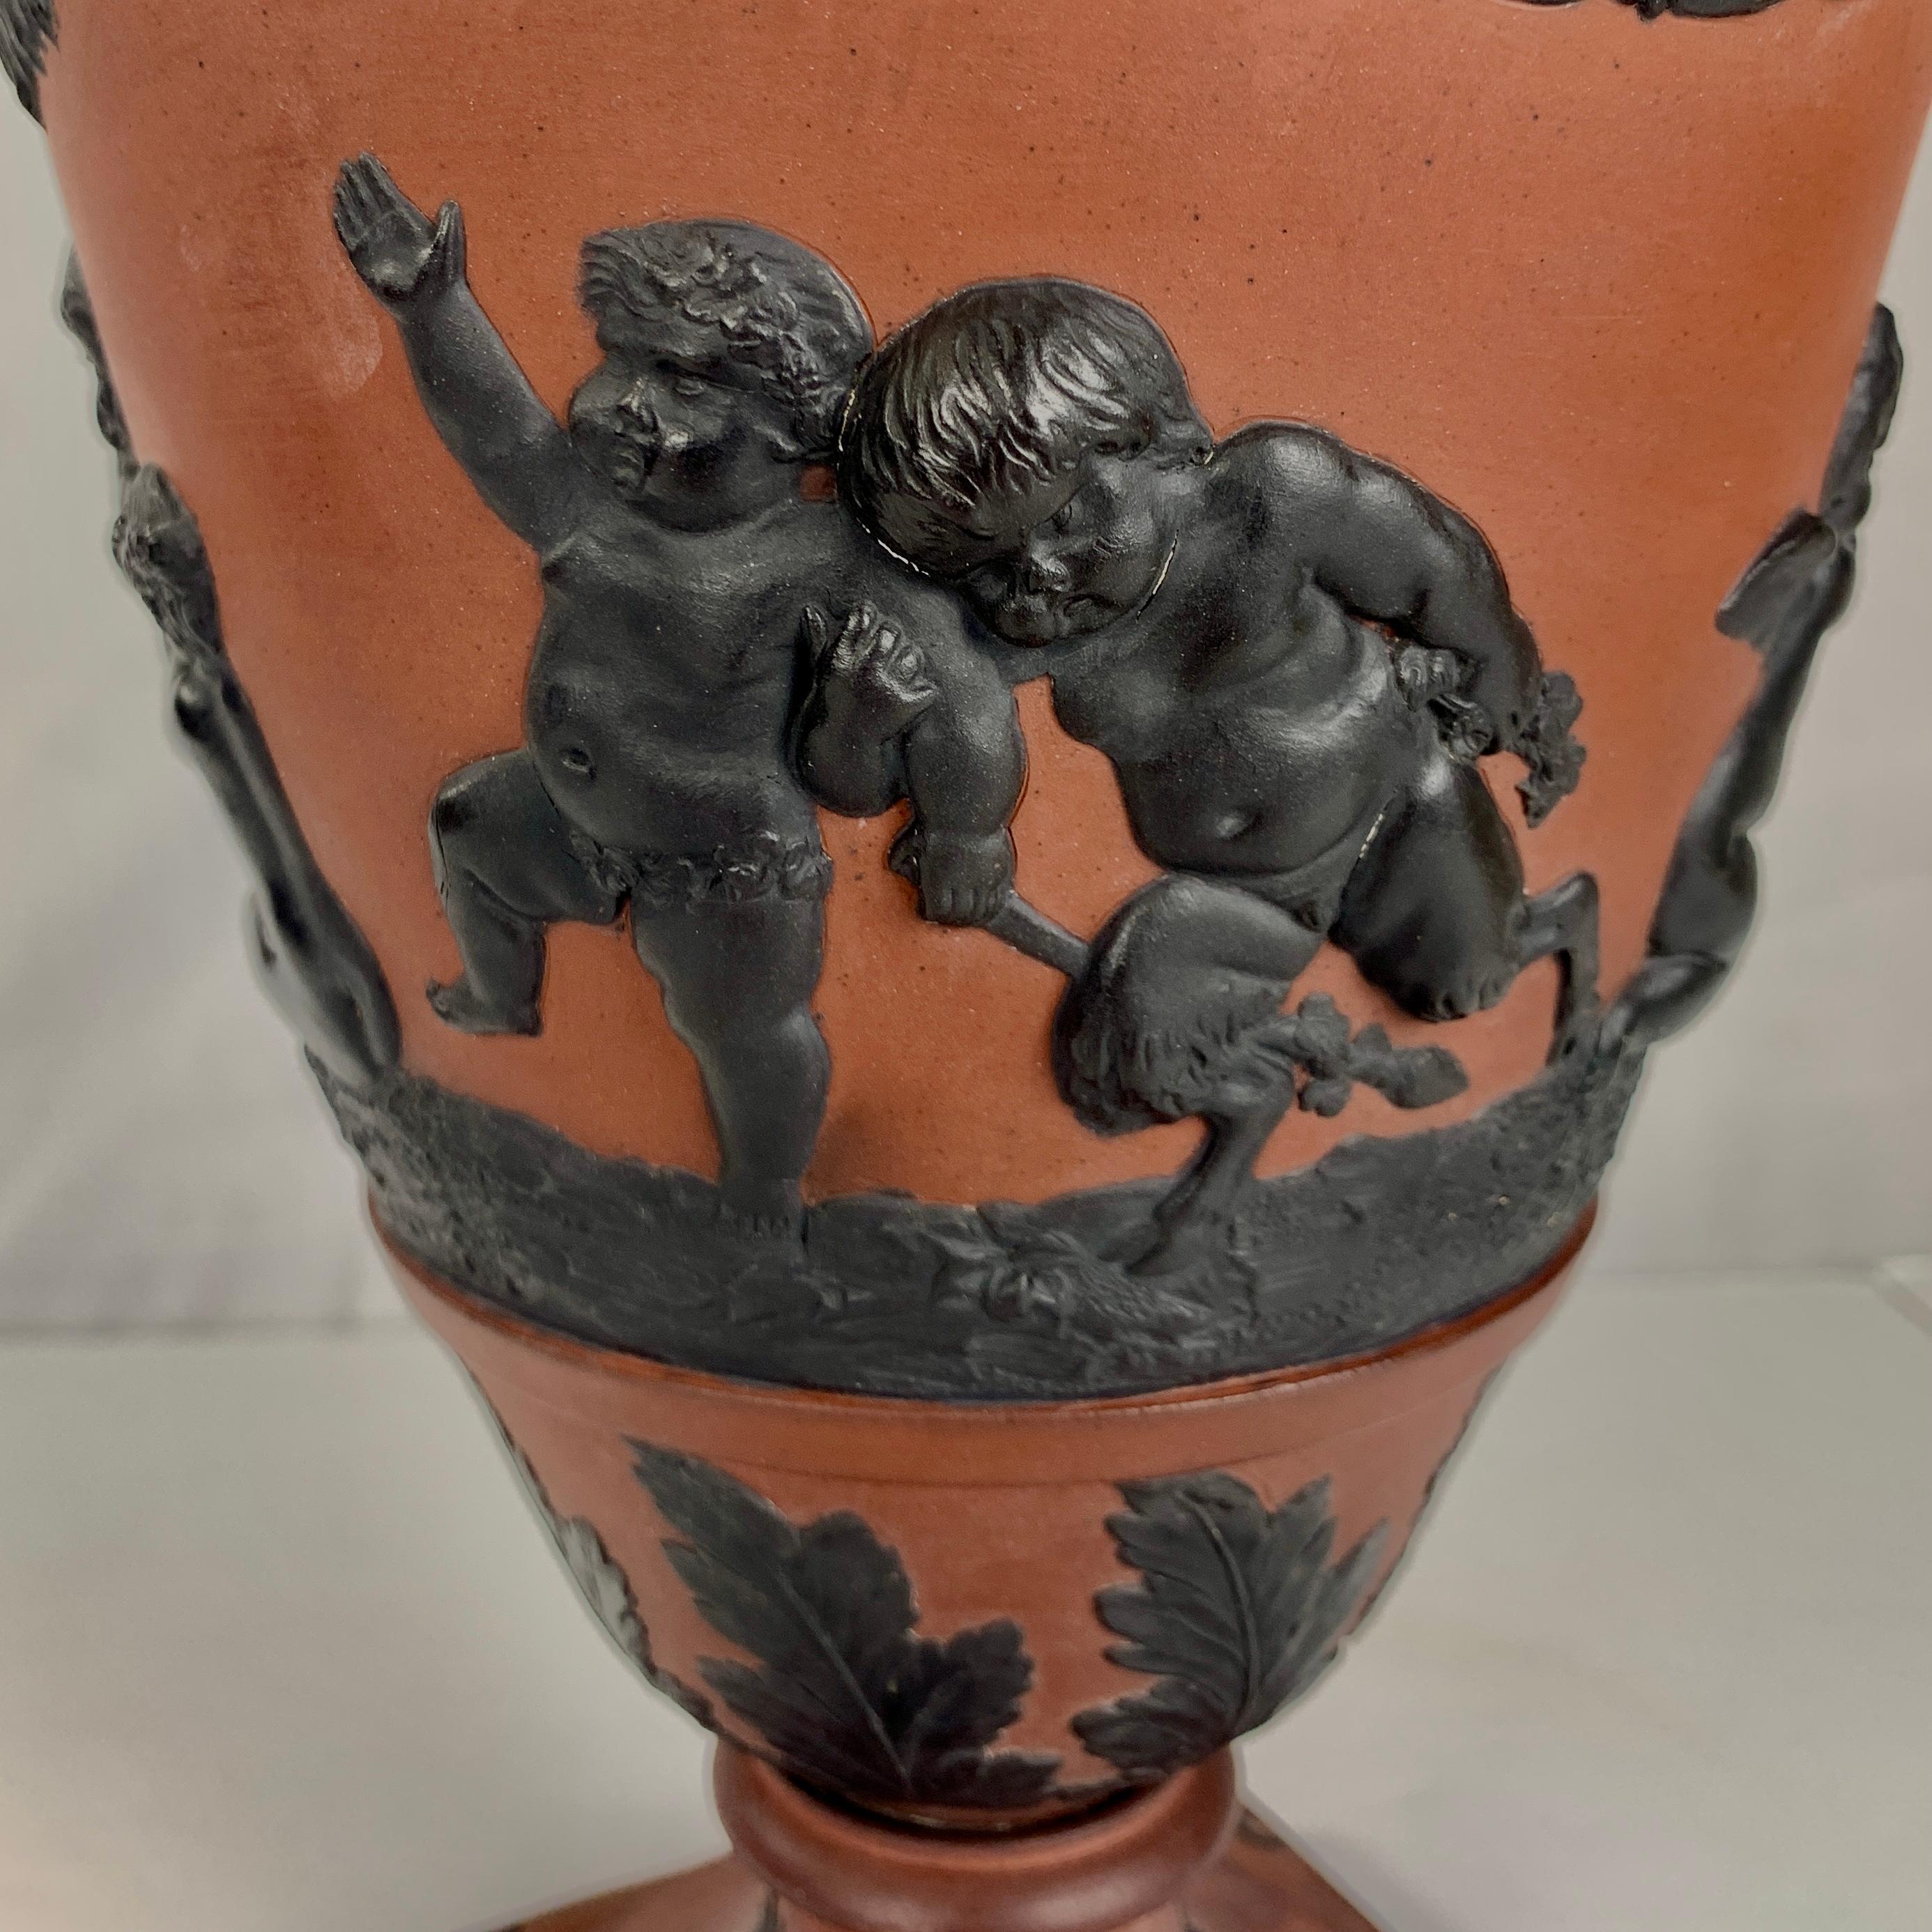 This magnificent vase, made in England circa 1815, is a true work of art. Crafted from luxurious Rosso Antico stoneware and adorned with applied black basalt in deep relief, this vase exudes elegance and excitement.
The Bacchanalian and celebratory